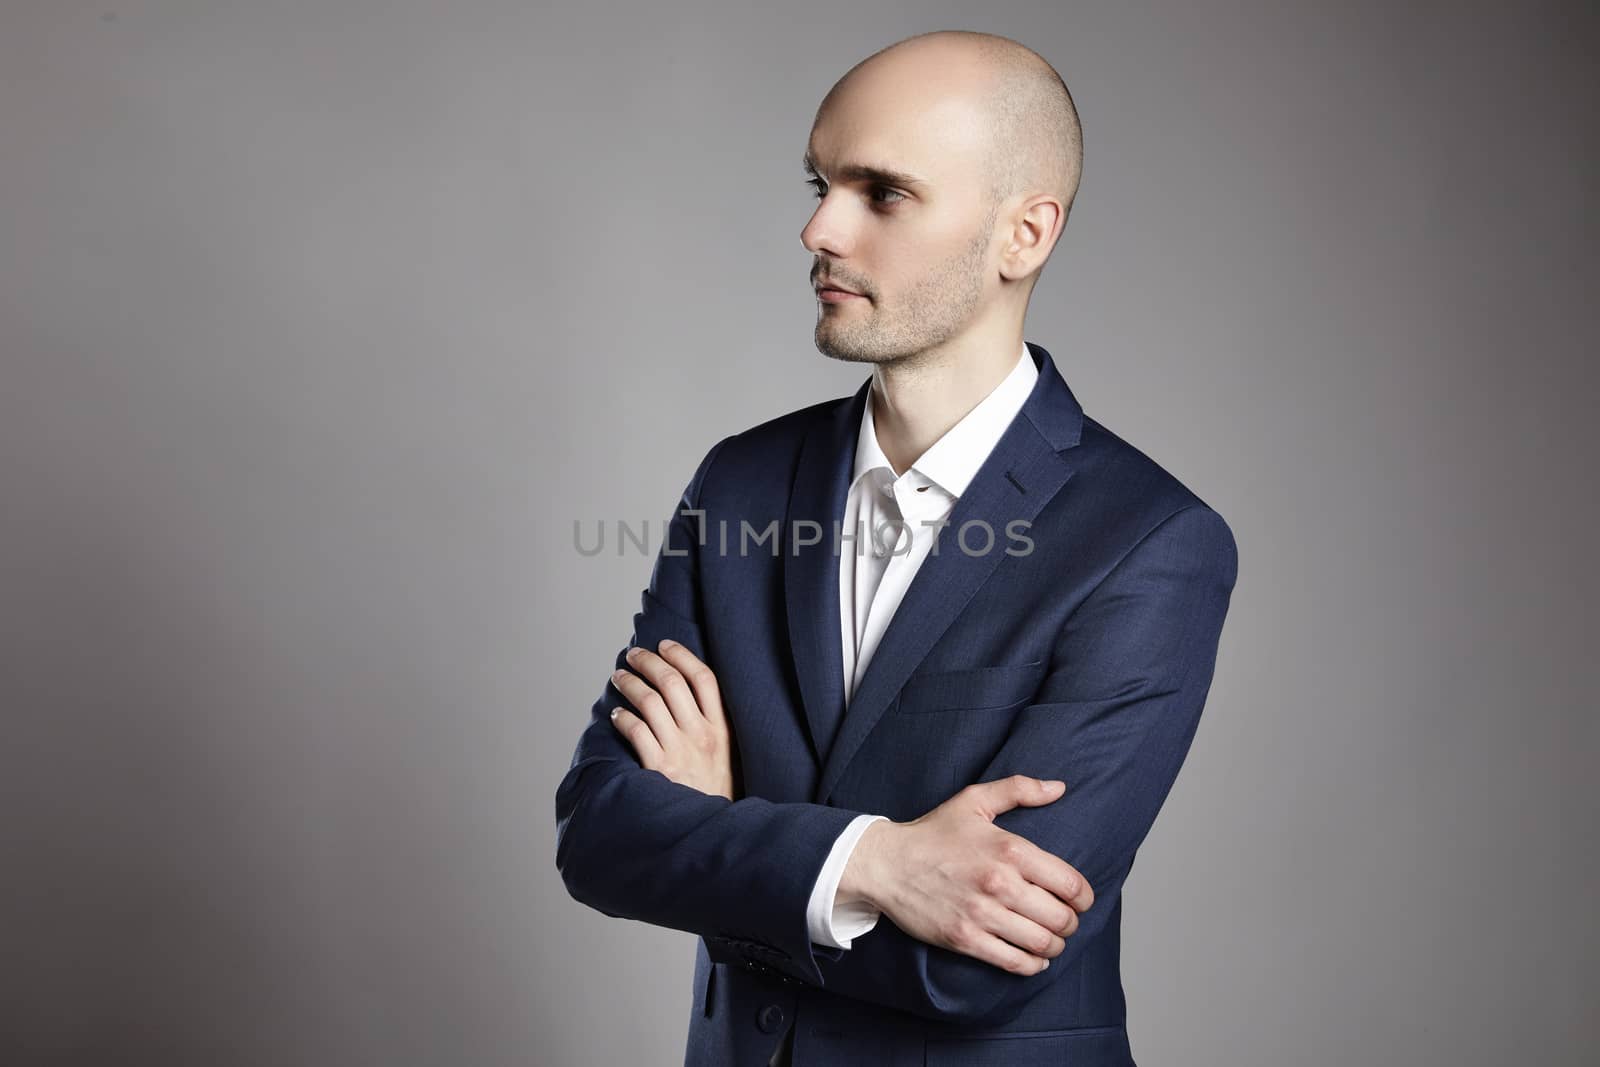 Side view of young man wearing suit on gray background. He is serious.